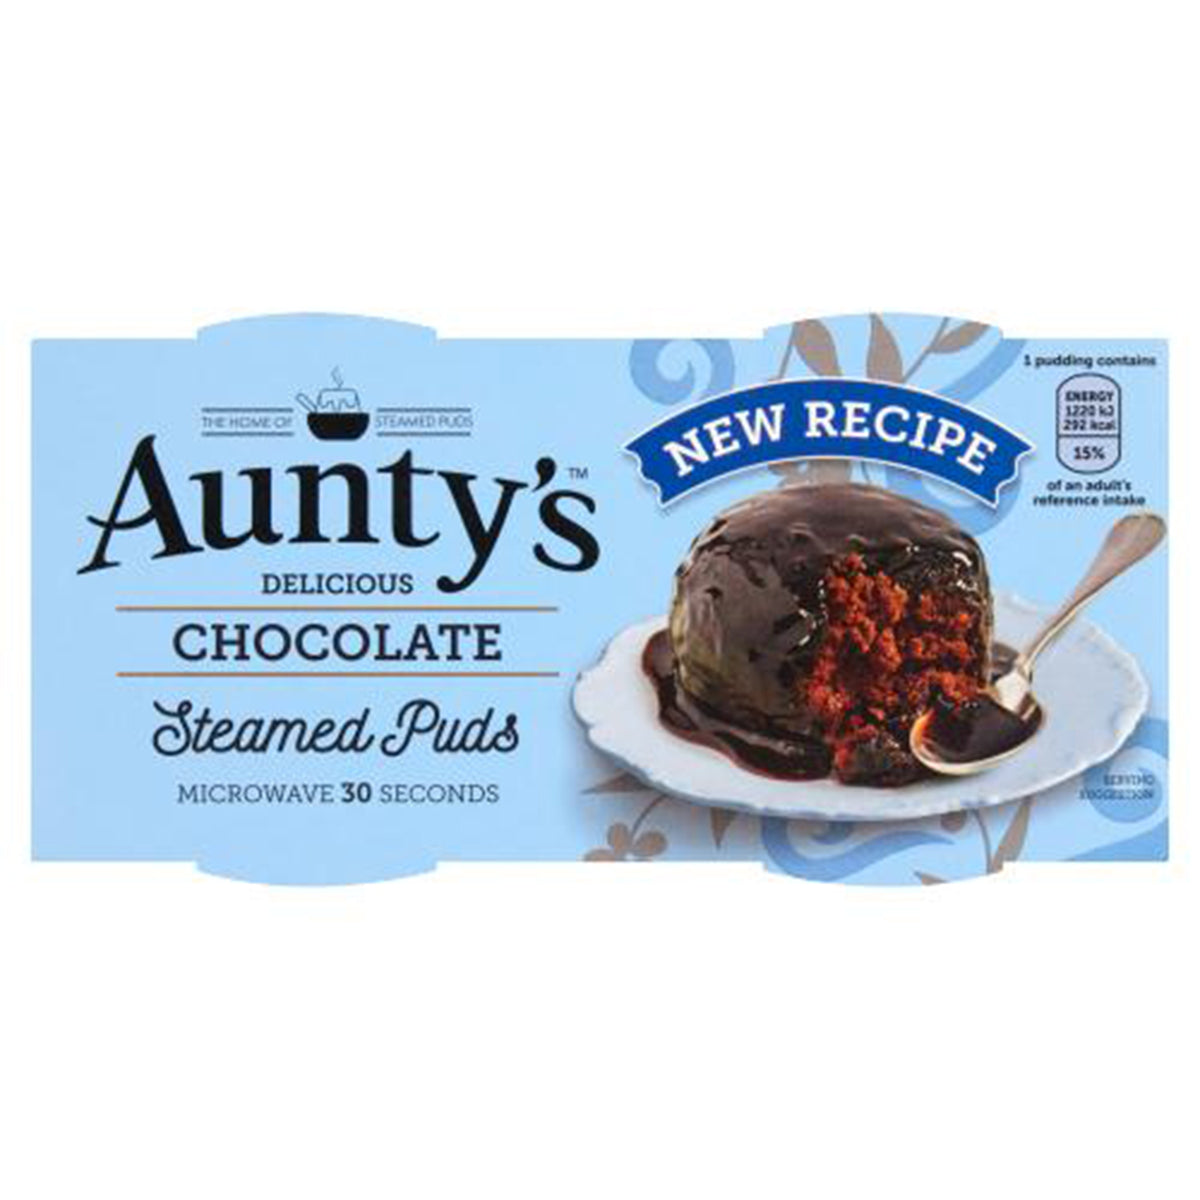 Packaging for Aunty's Delicious Chocolate Steamed Puds - 190g, highlighting that it's a new recipe and can be microwaved in 30 seconds.